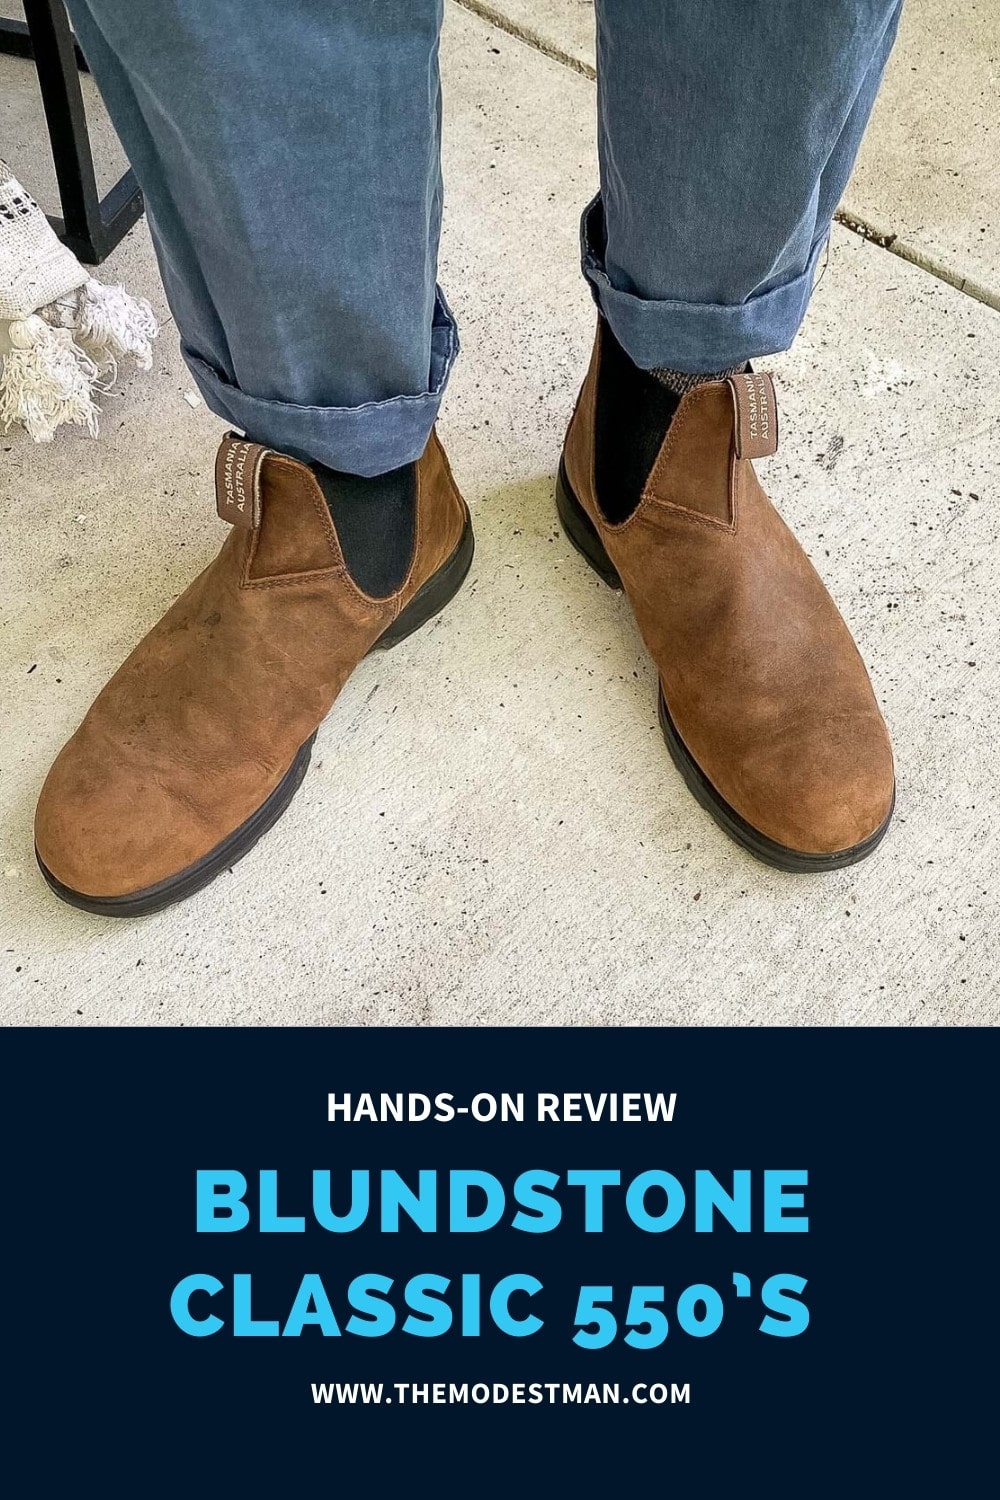 blundstone classic 550s review graphic